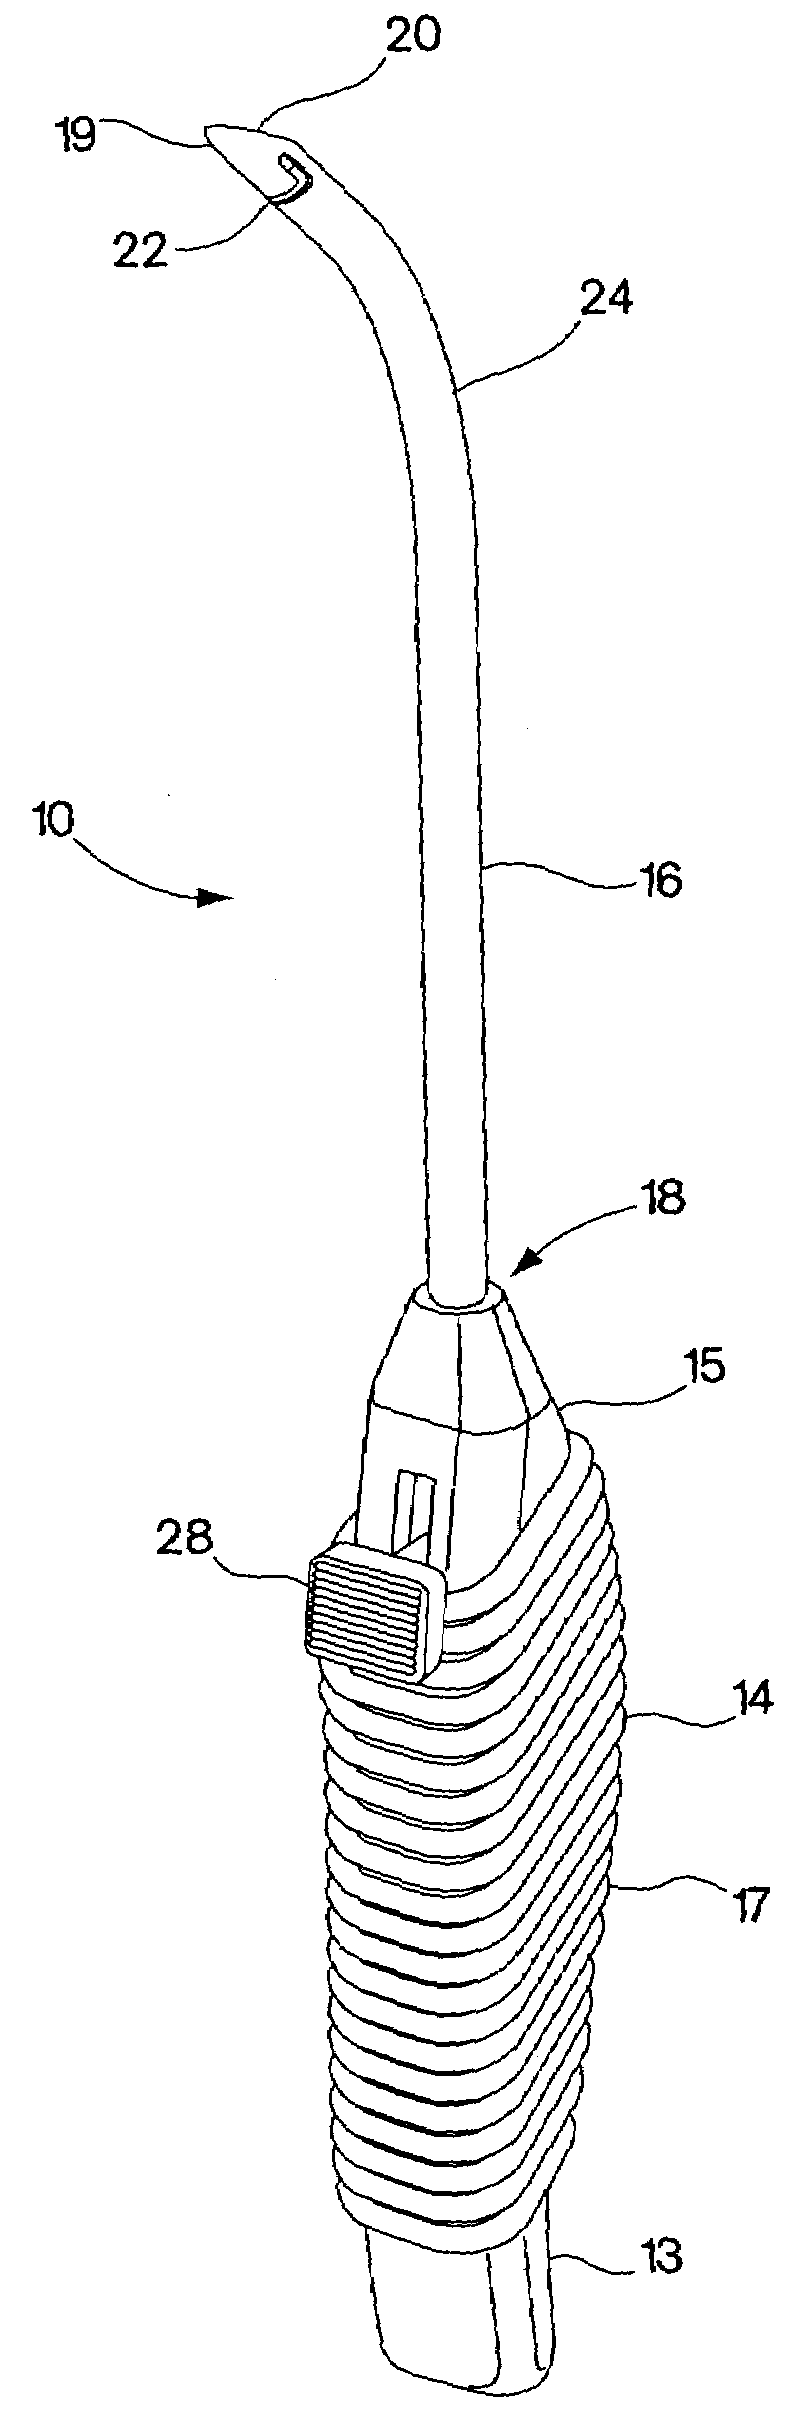 Methods and devices for the treatment of urinary incontinence